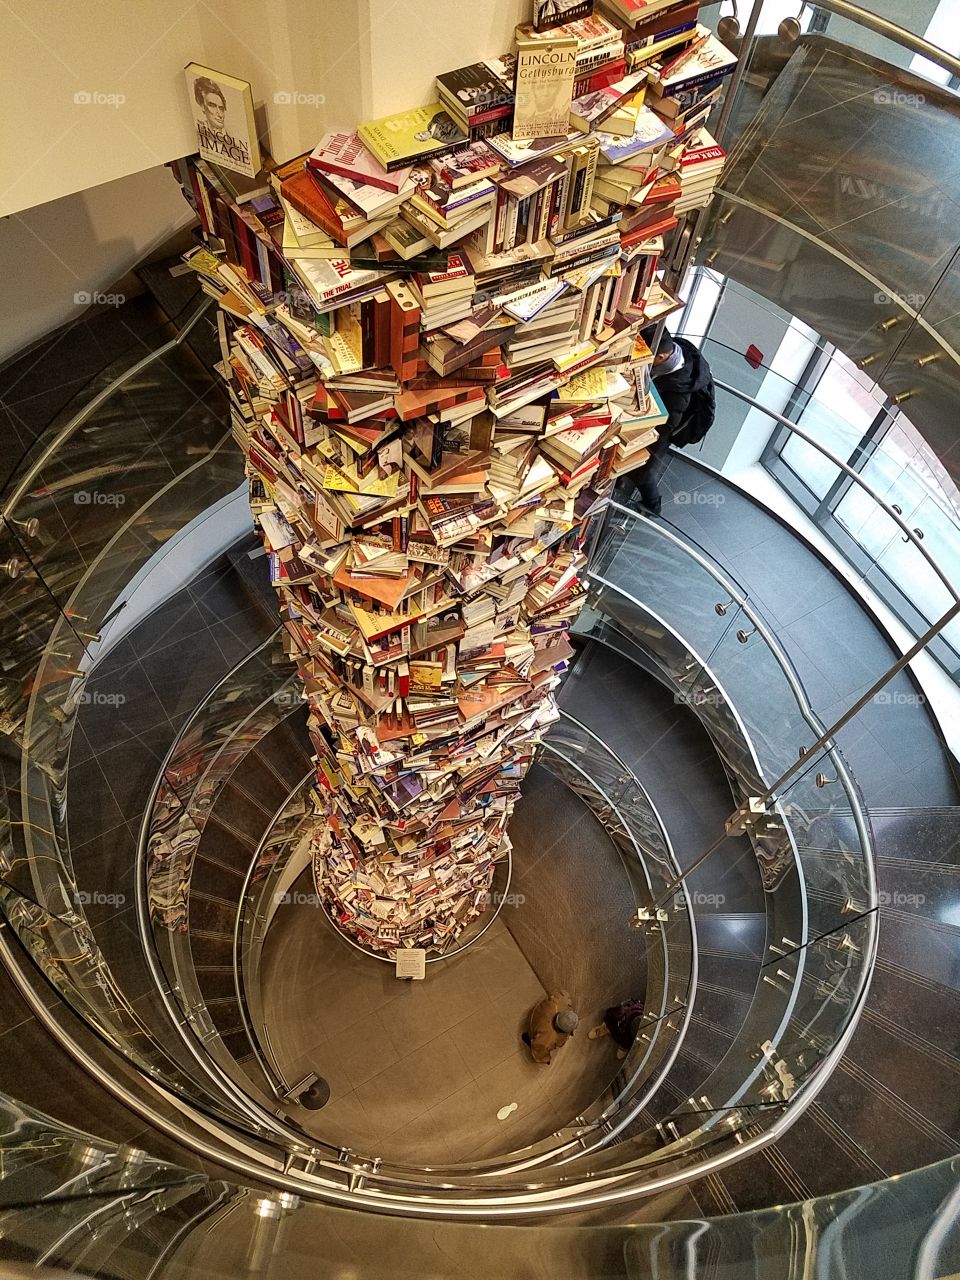 Tower of books from above